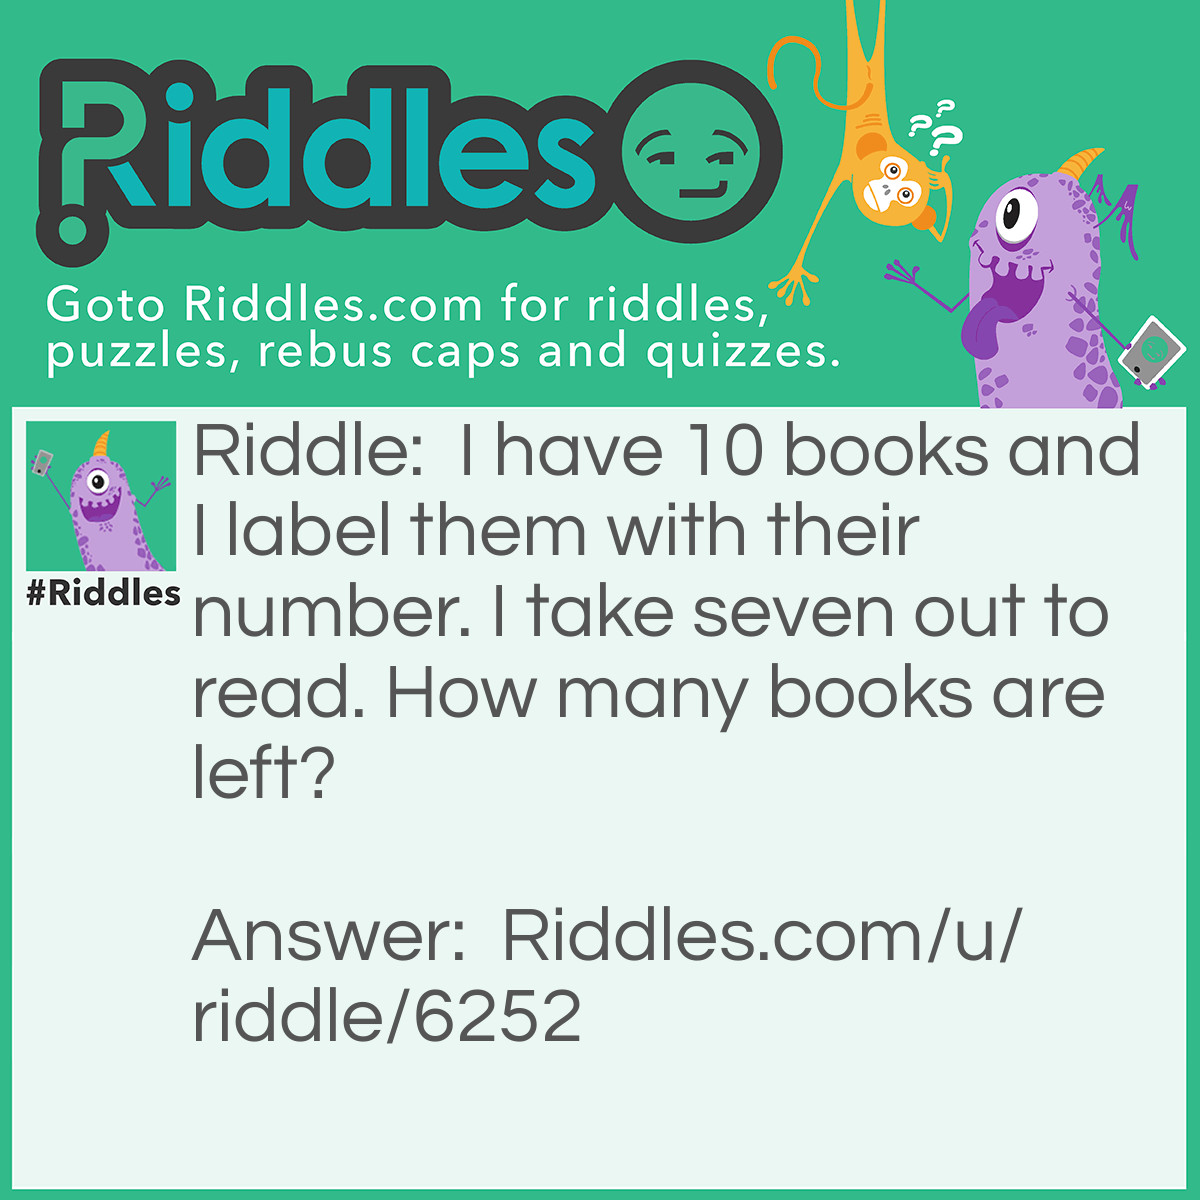 Riddle: I have 10 books and I label them with their number. I take seven out to read. How many books are left? Answer: 9! You have token the book with the label seven!